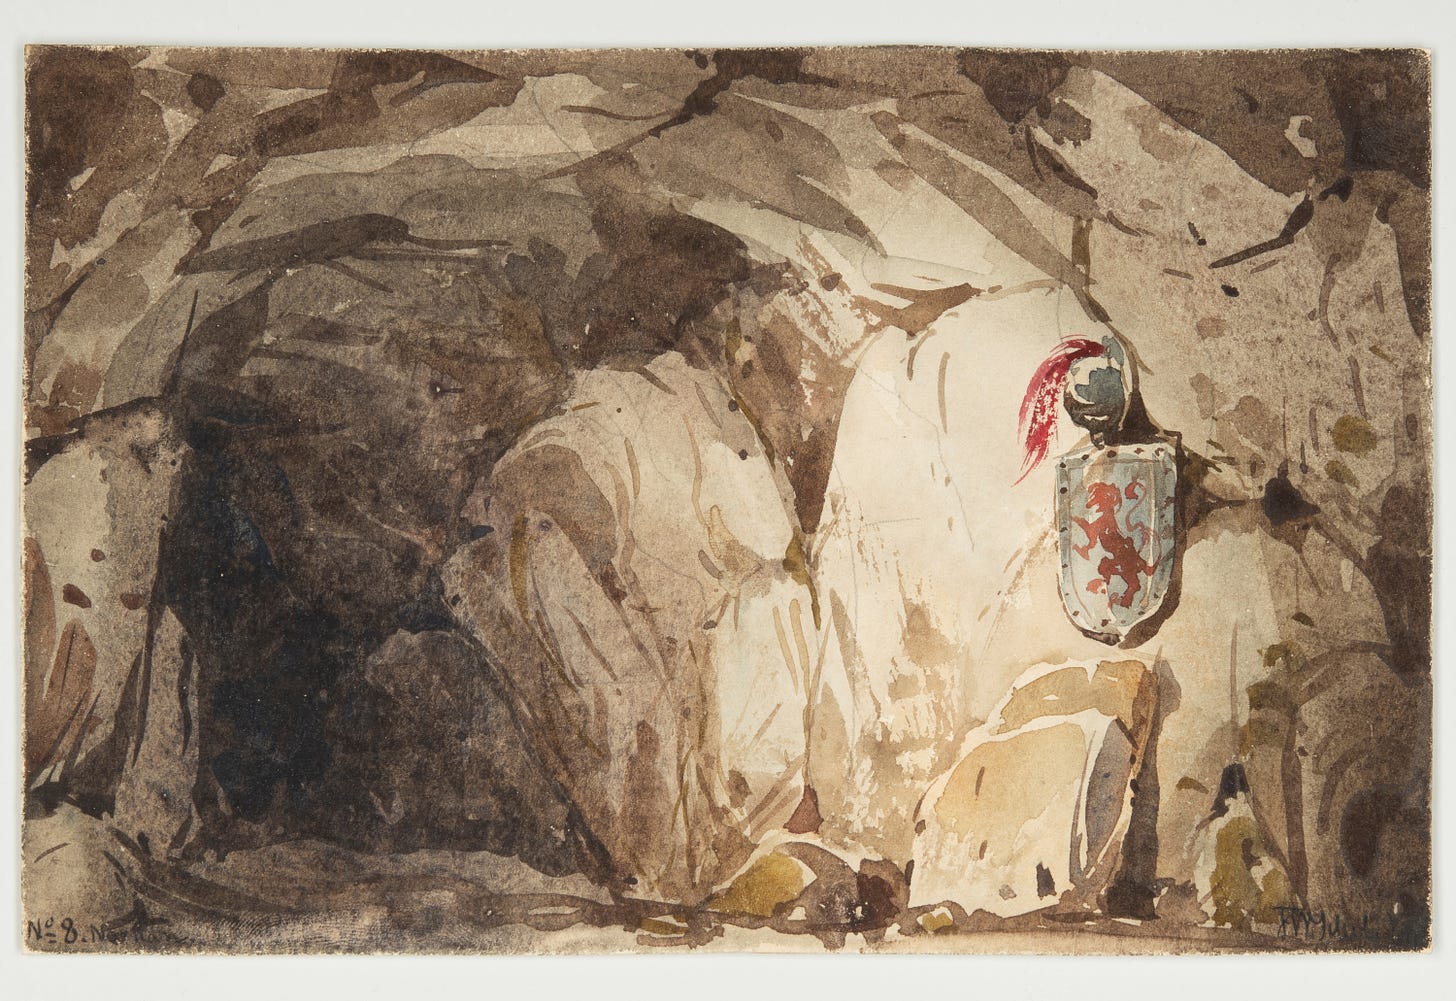 The entrance to a cave, a helmet and shield rests on the wall.